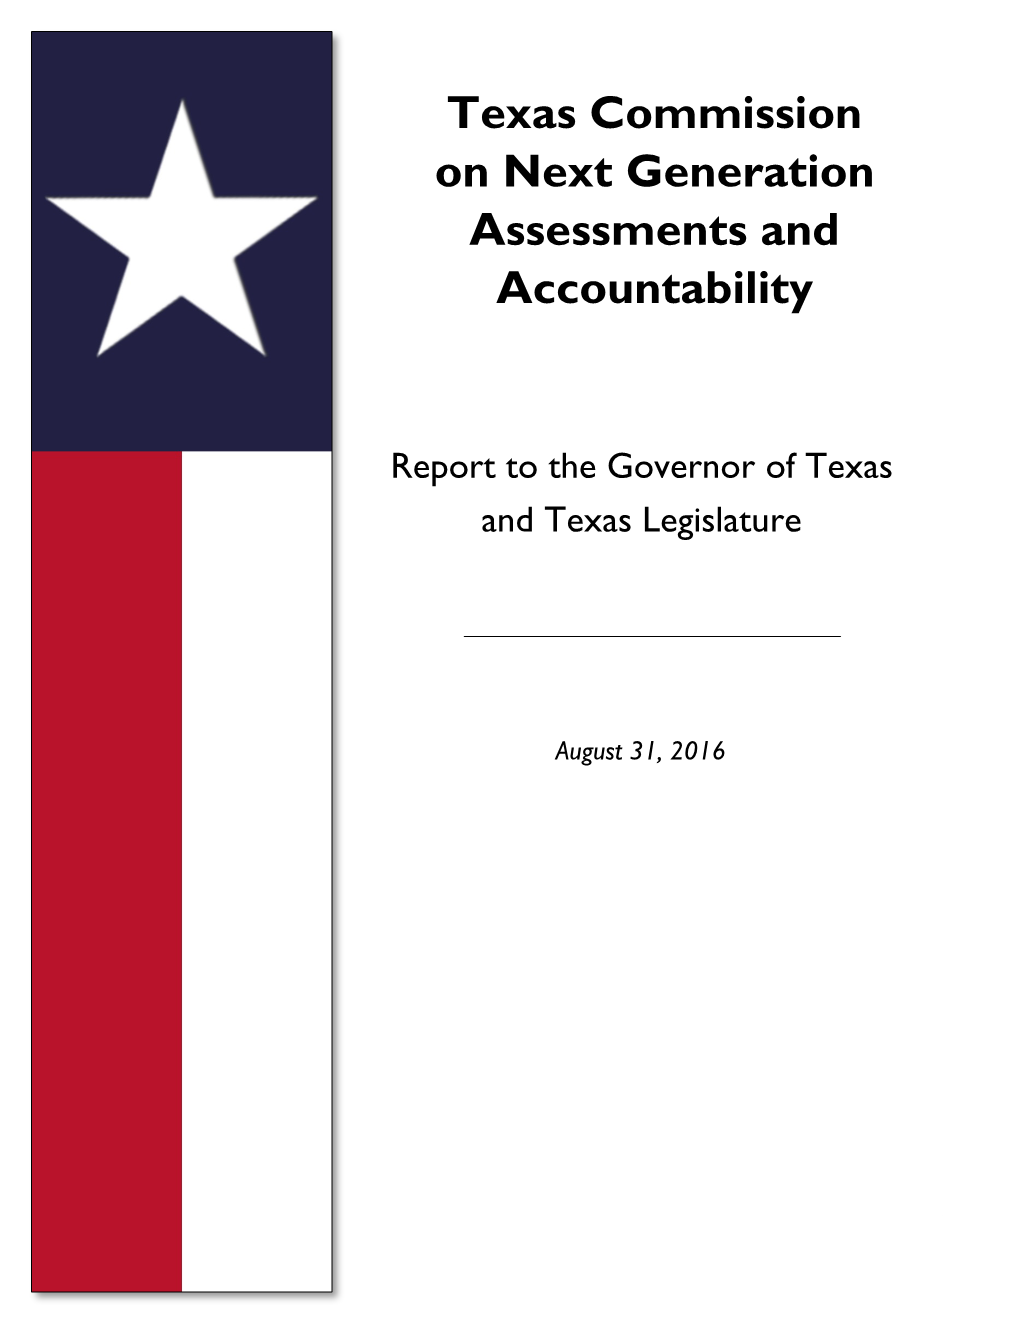 Texas Commission on Next Generation Assessments and Accountability